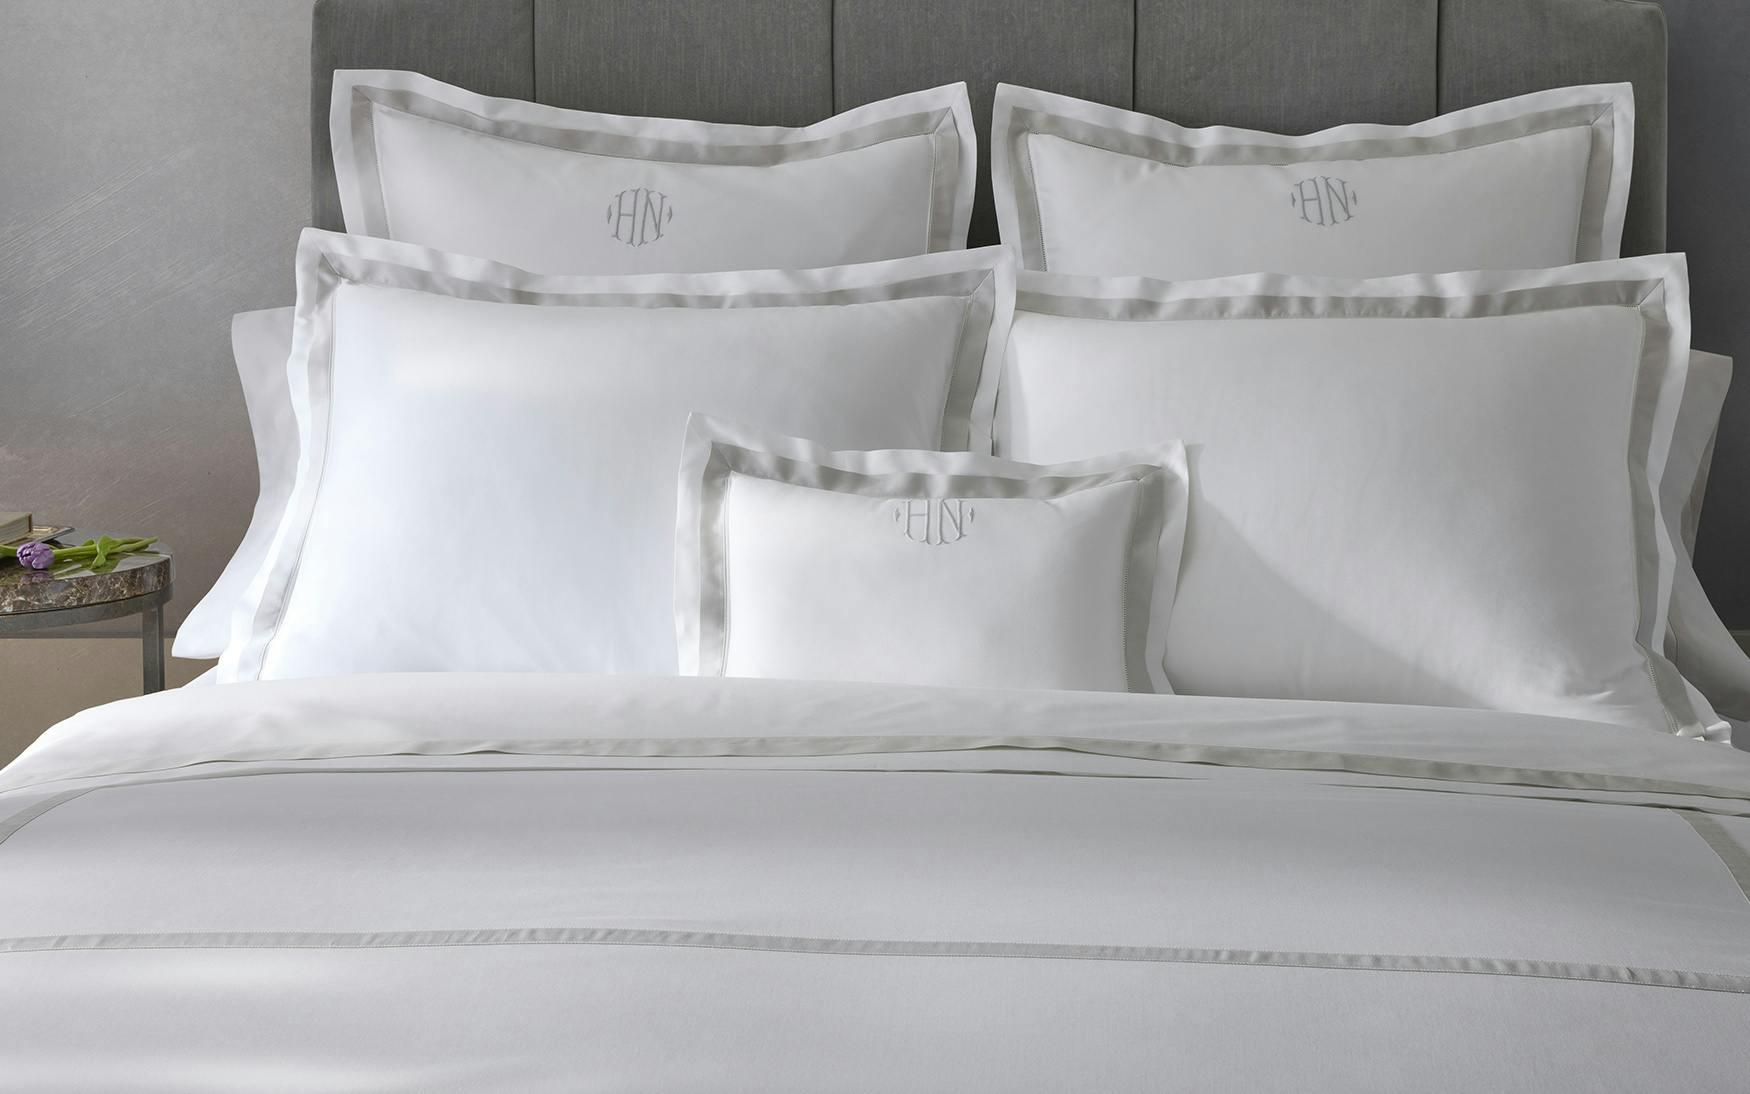 Monogrammed Pillow Sham Pillowcases Embroidered Silver Standard